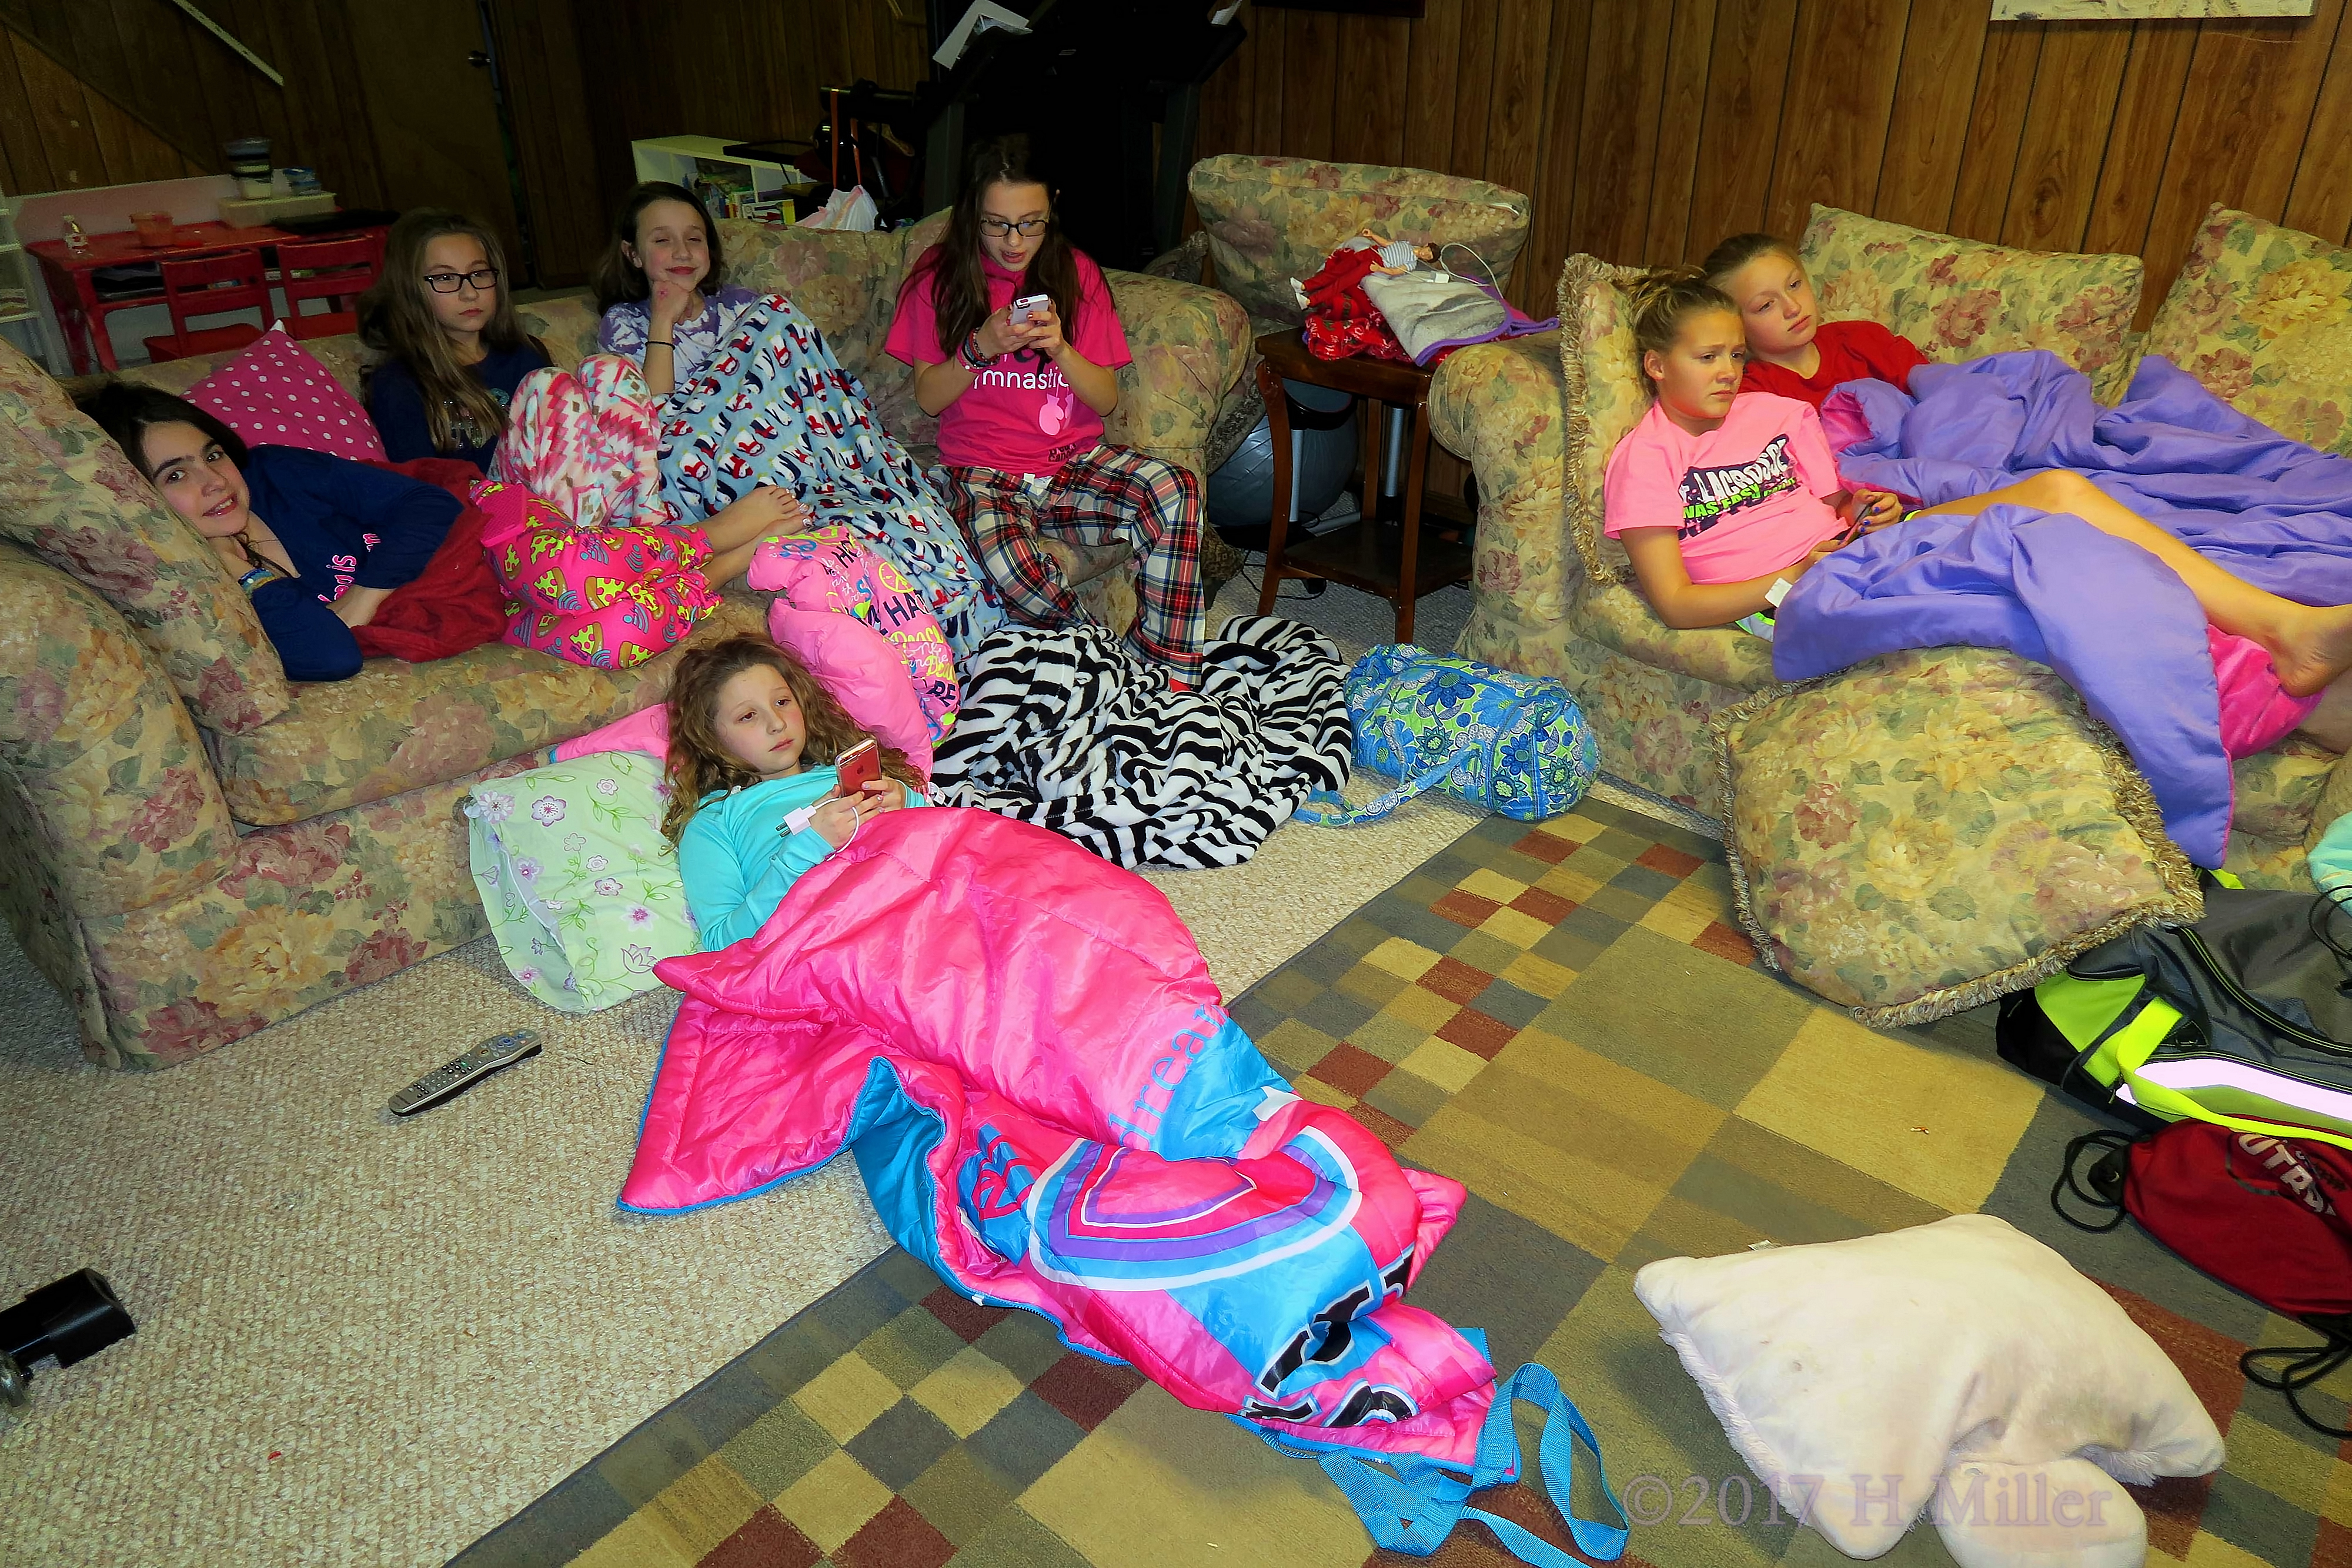 Sleeping Bags Set Up For The After Spa Kids Sleepover! 4